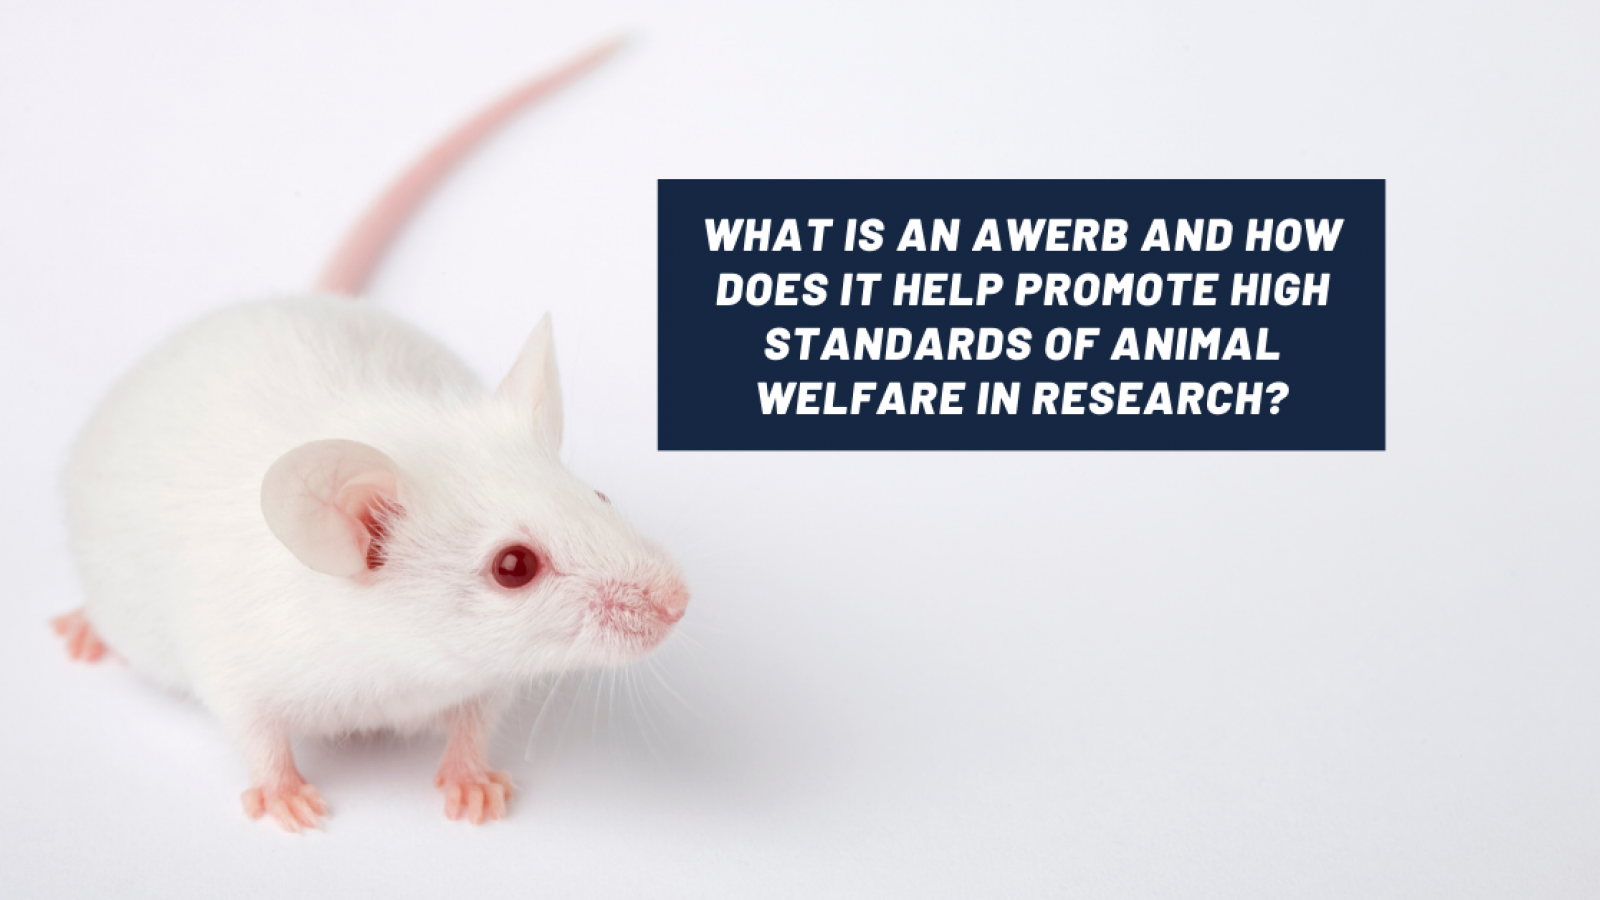 What is an AWERB and how does it help promote high standards of animal welfare in research?